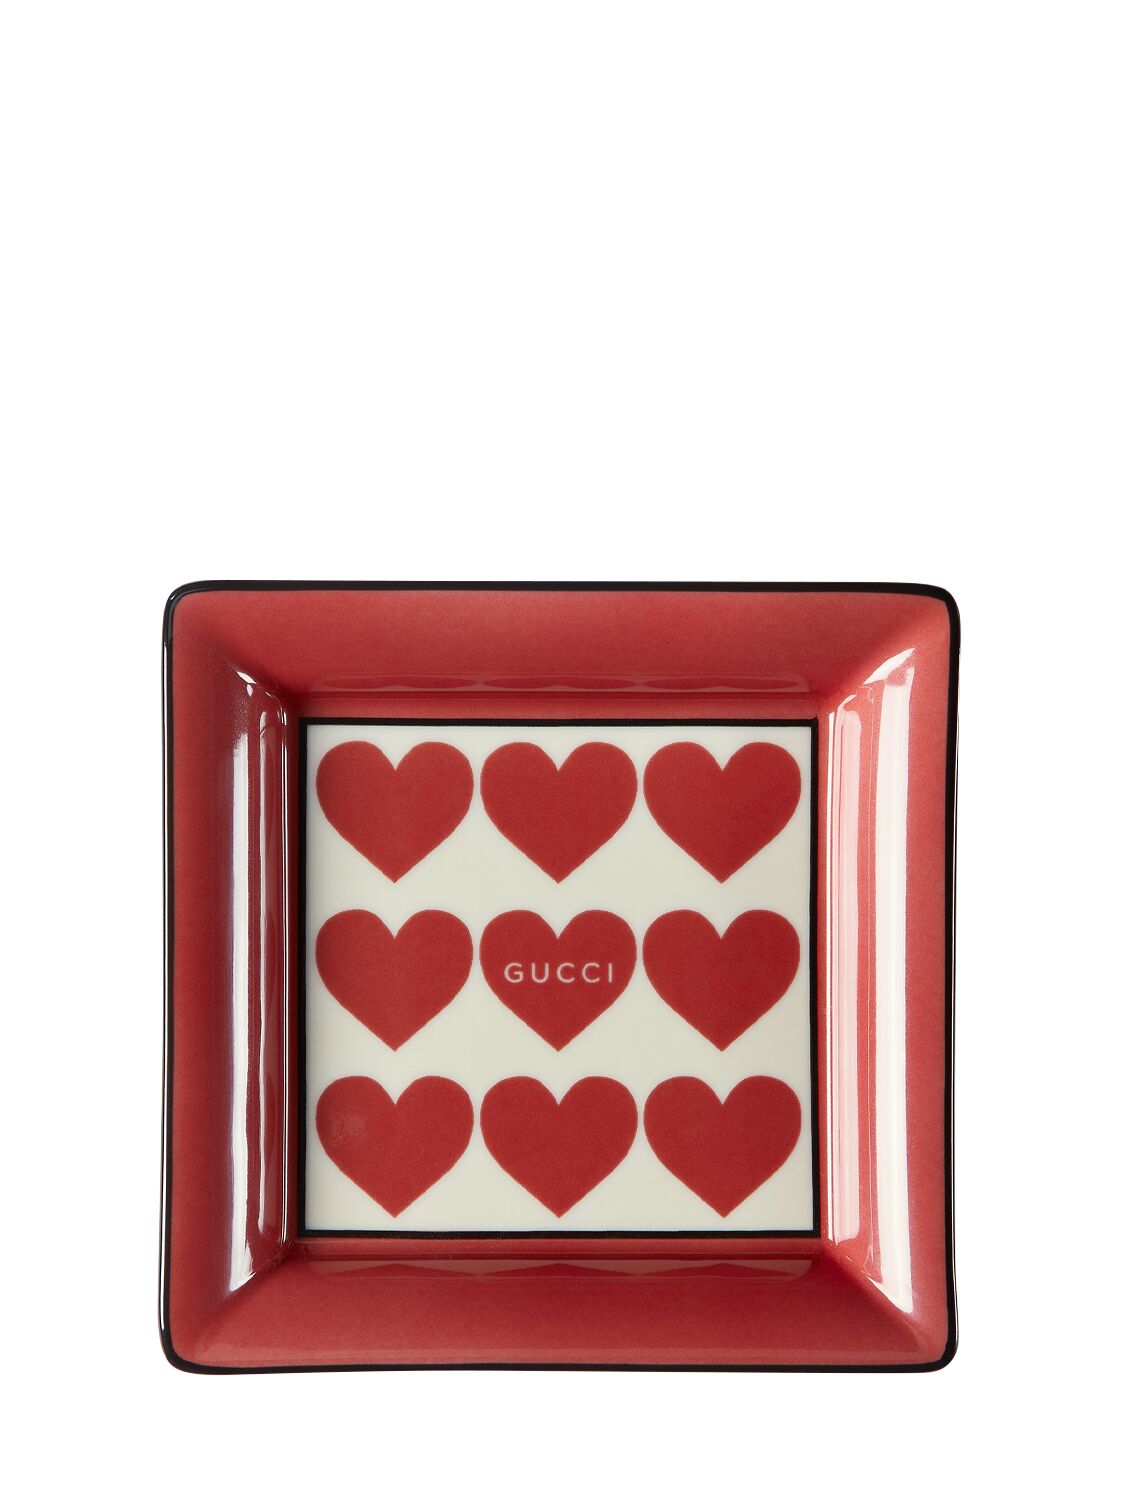 Gucci Hearts Square Porcelain Ashtray In Red,ivory